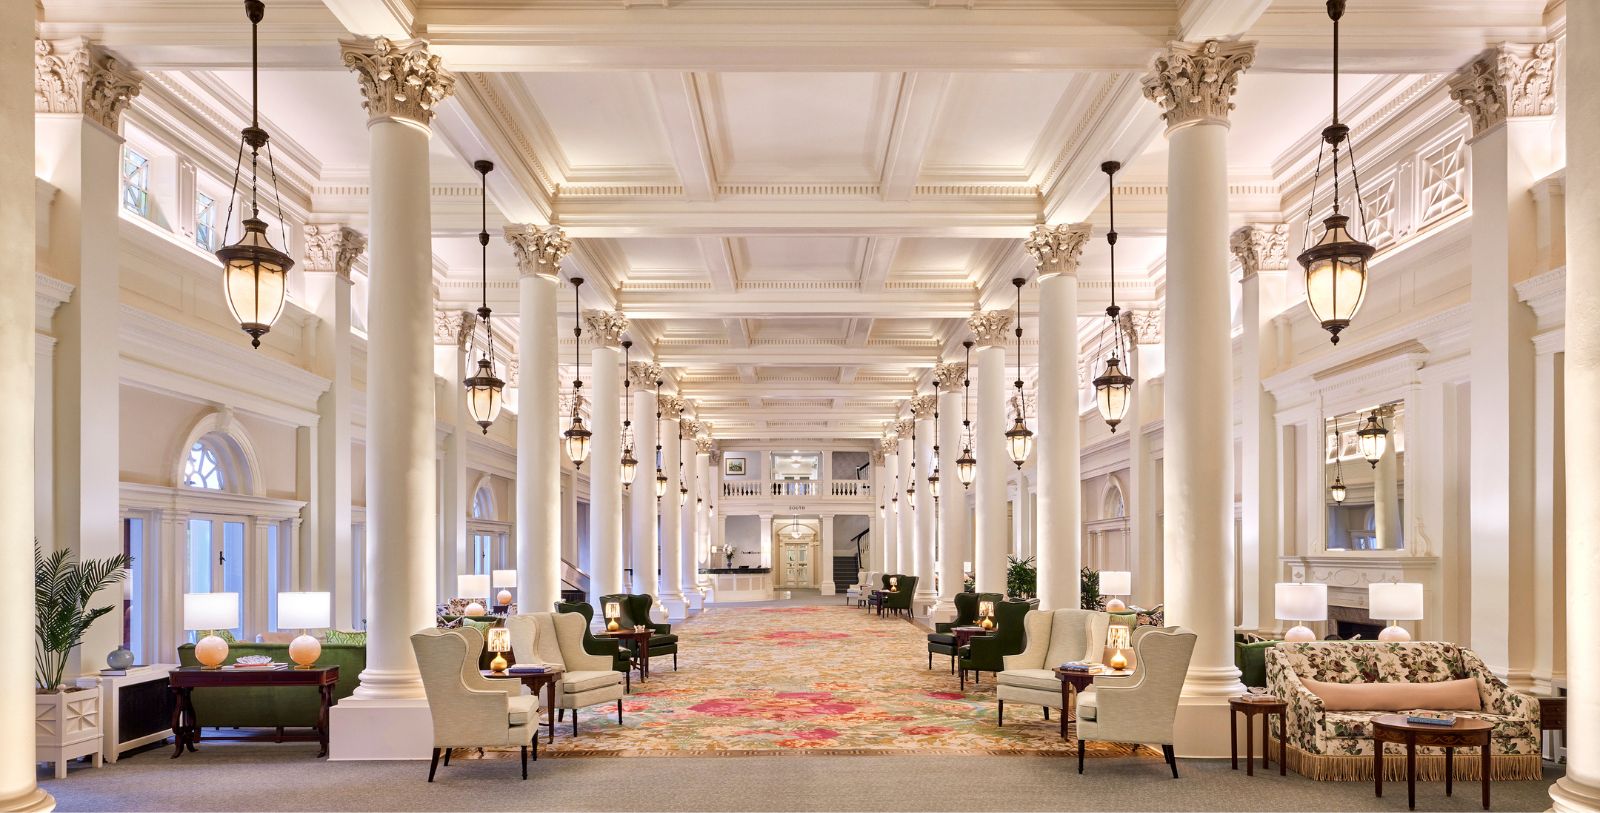 Discover the Great Hall at The Omni Homestead Resort.